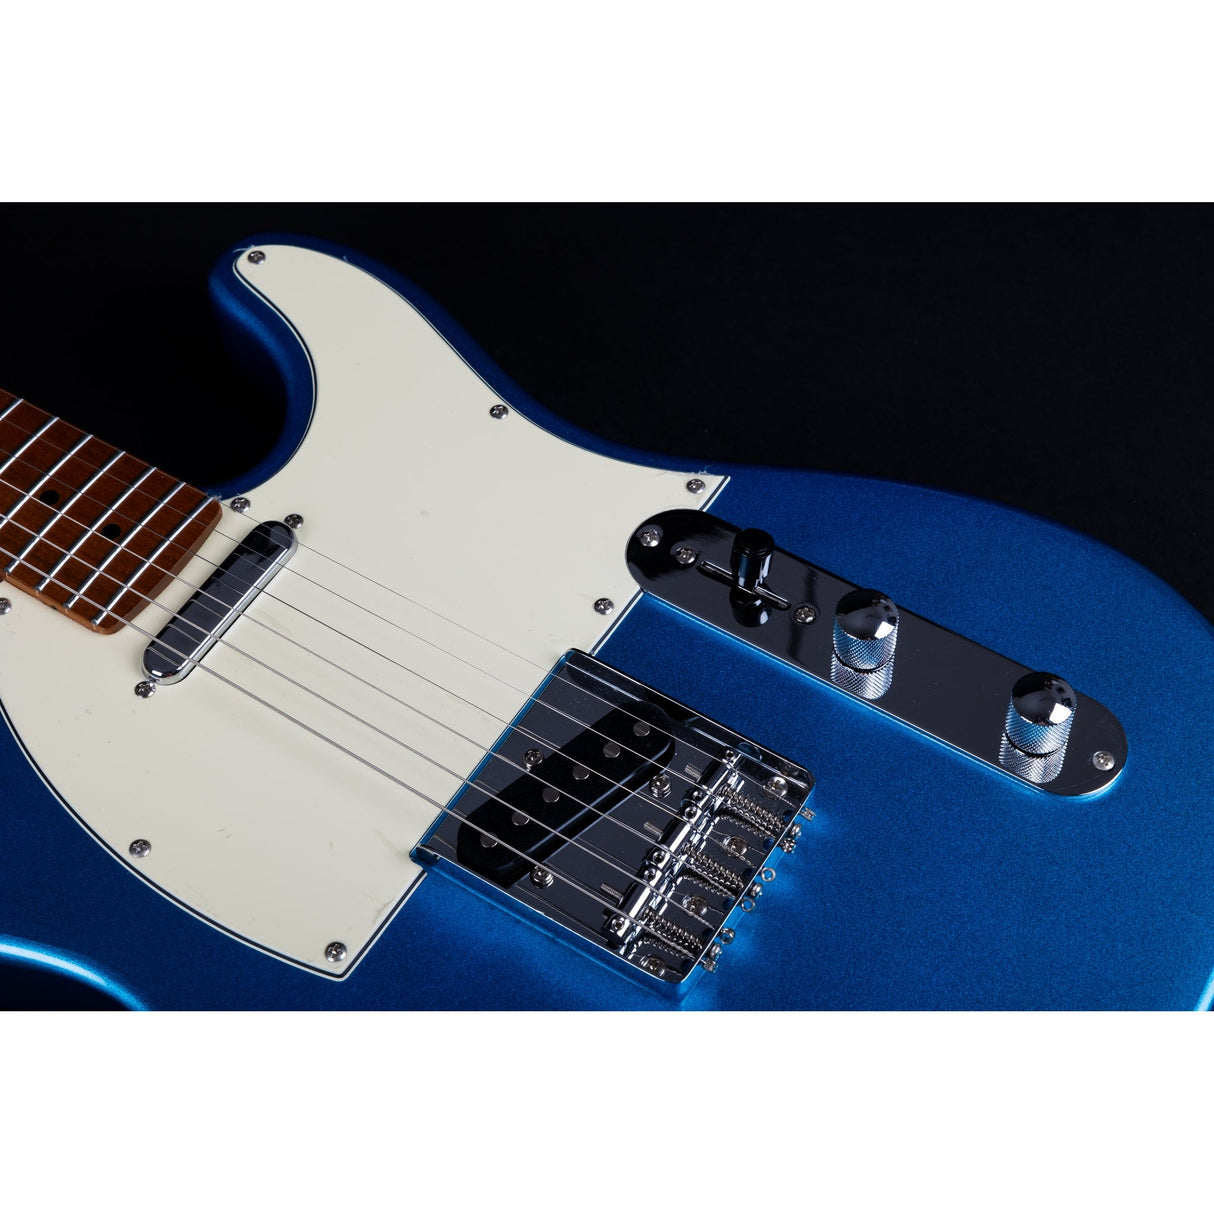 Jet Guitars JT-300 Canadian Roasted Maple Basswood Electric Guitar with SS Ceramic Pickup, Lake Placid Blue